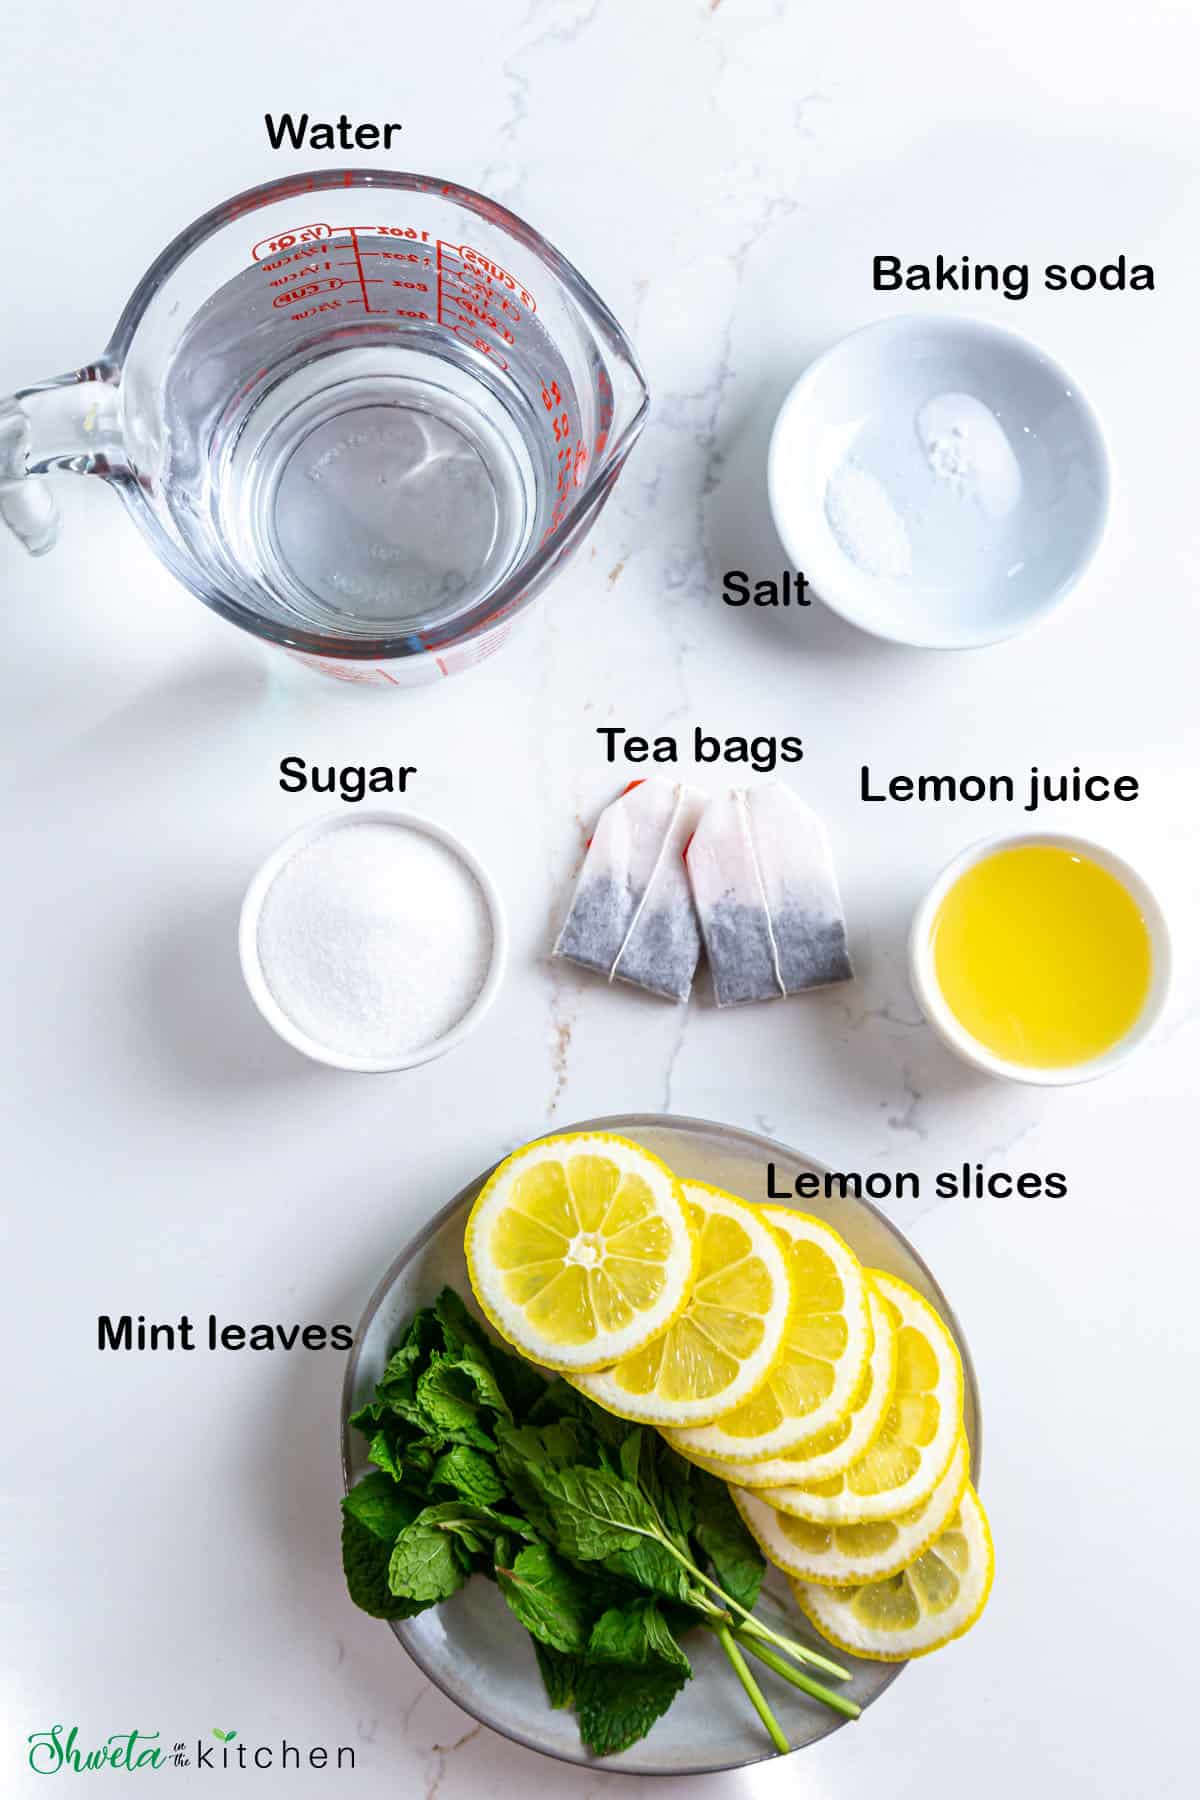 Ingredients for lemon iced tea placed on white surface